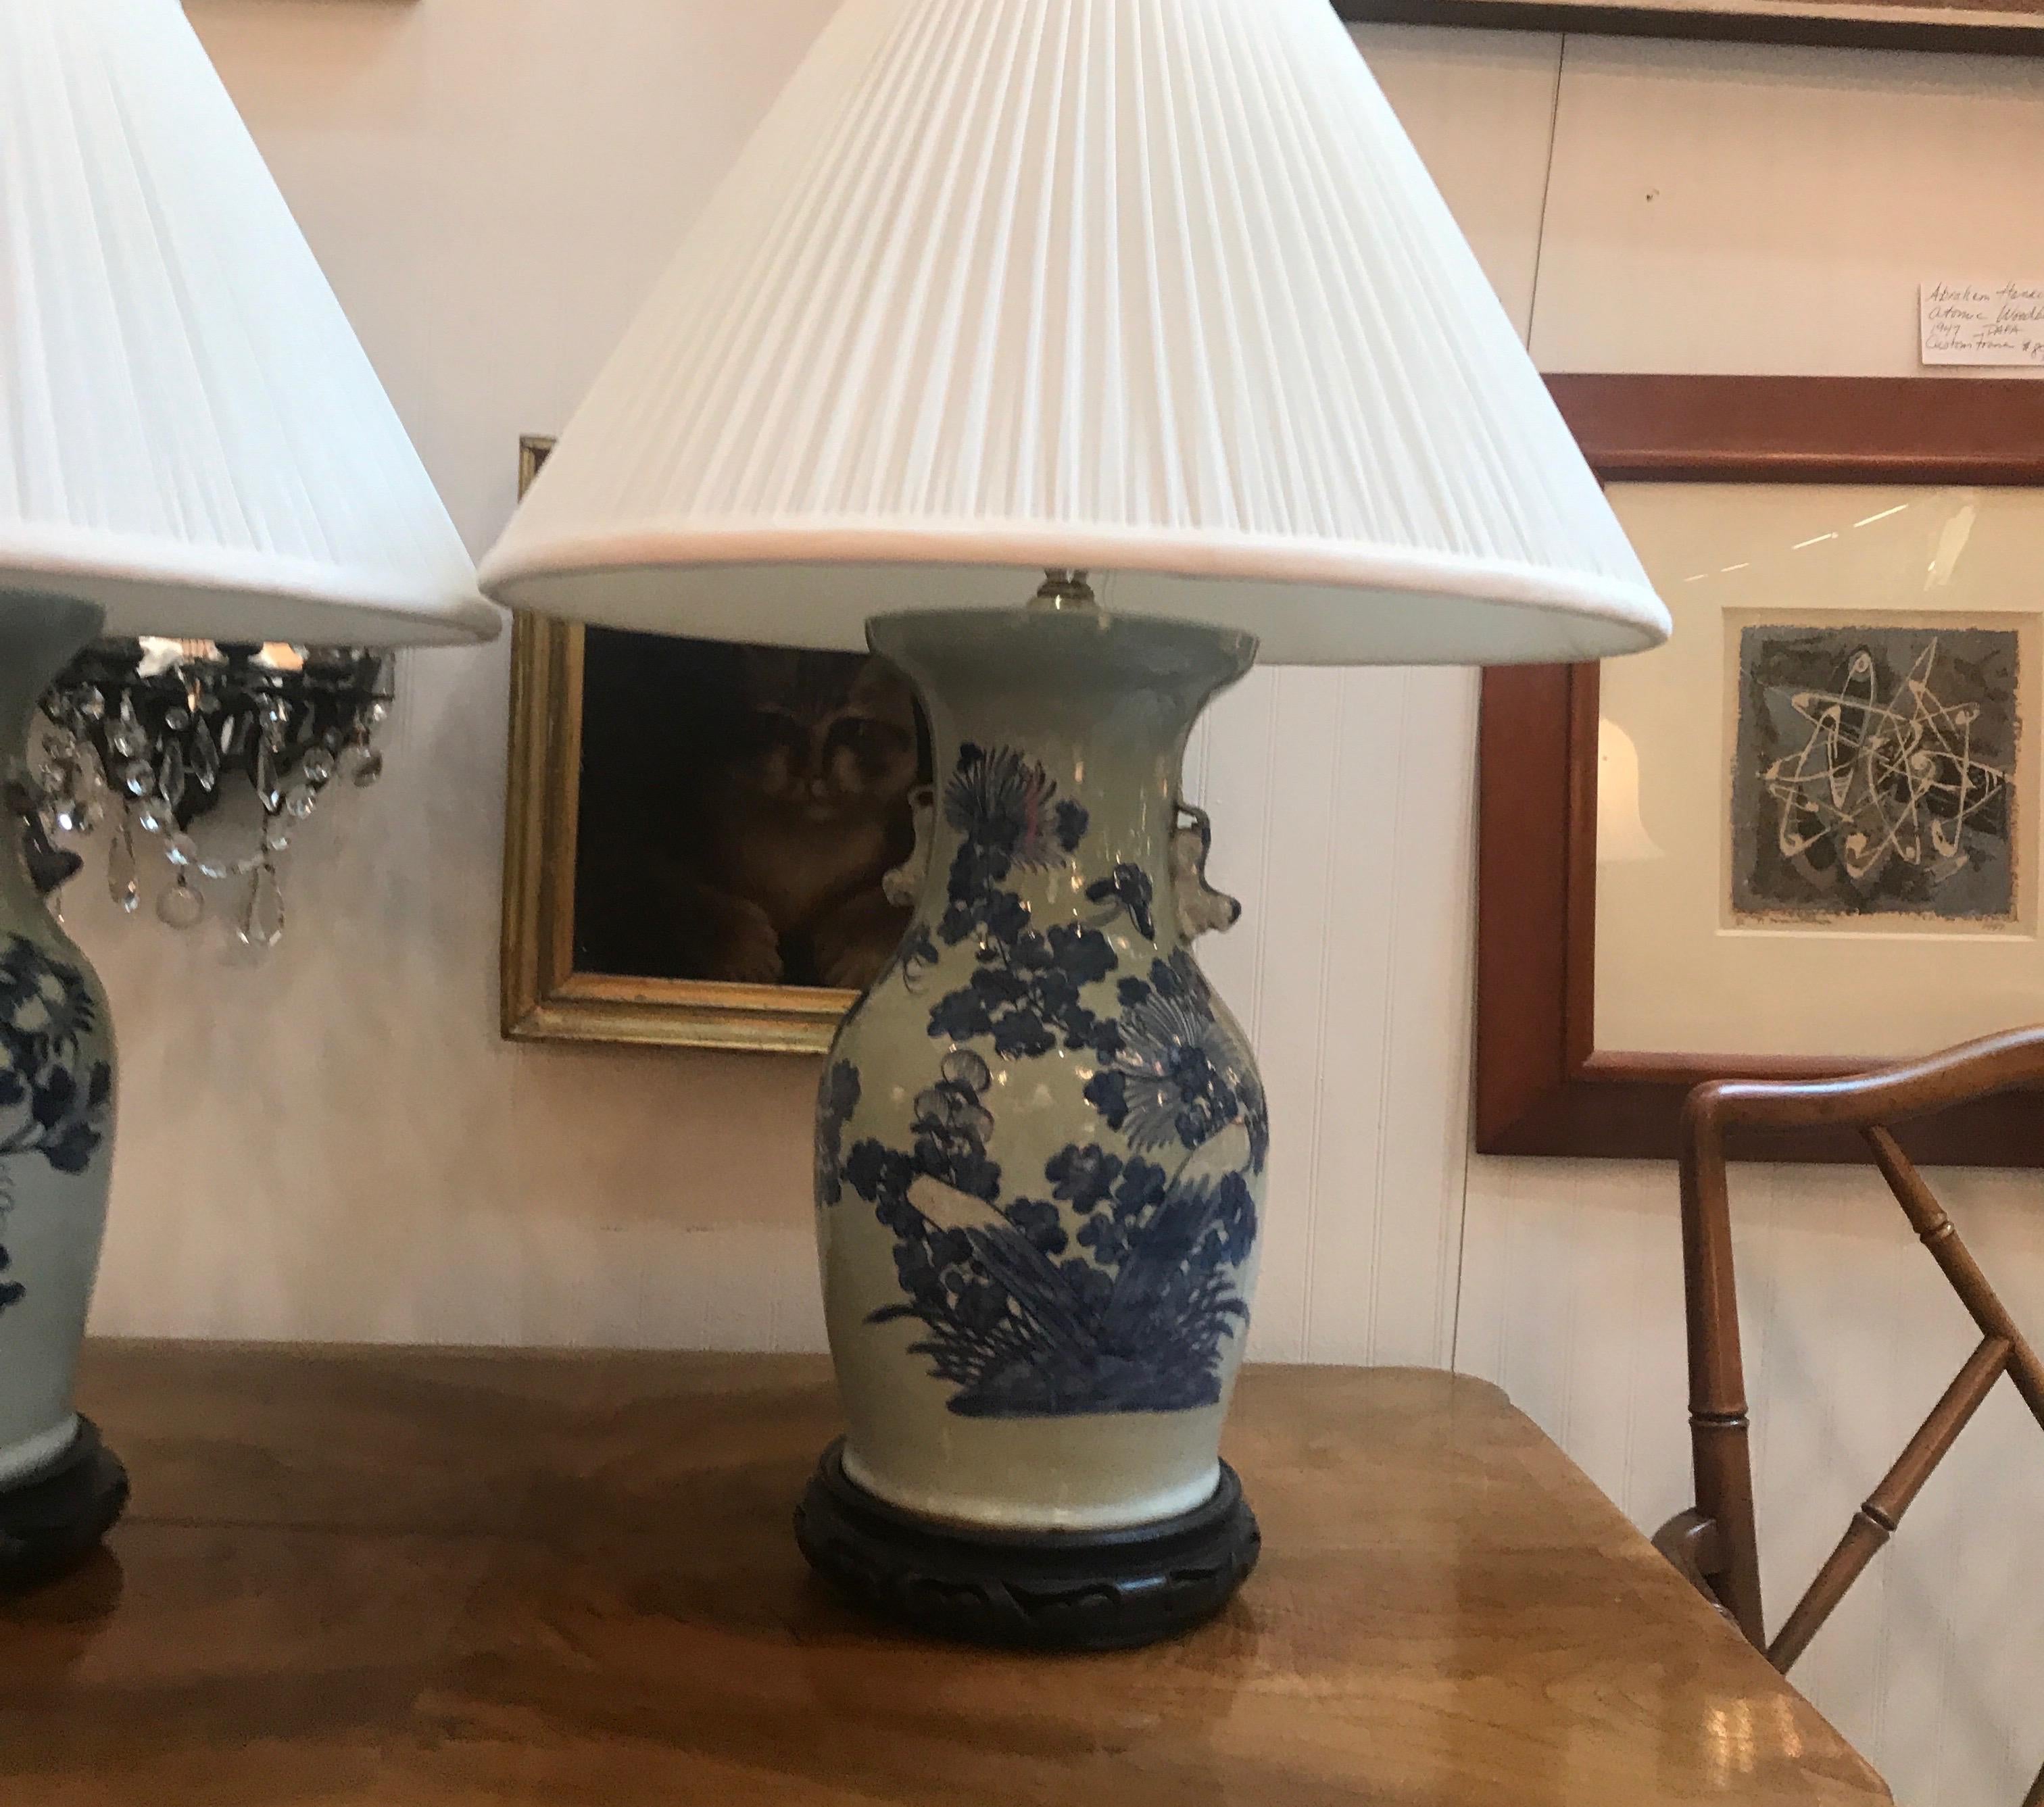 blue and white chinese lamps